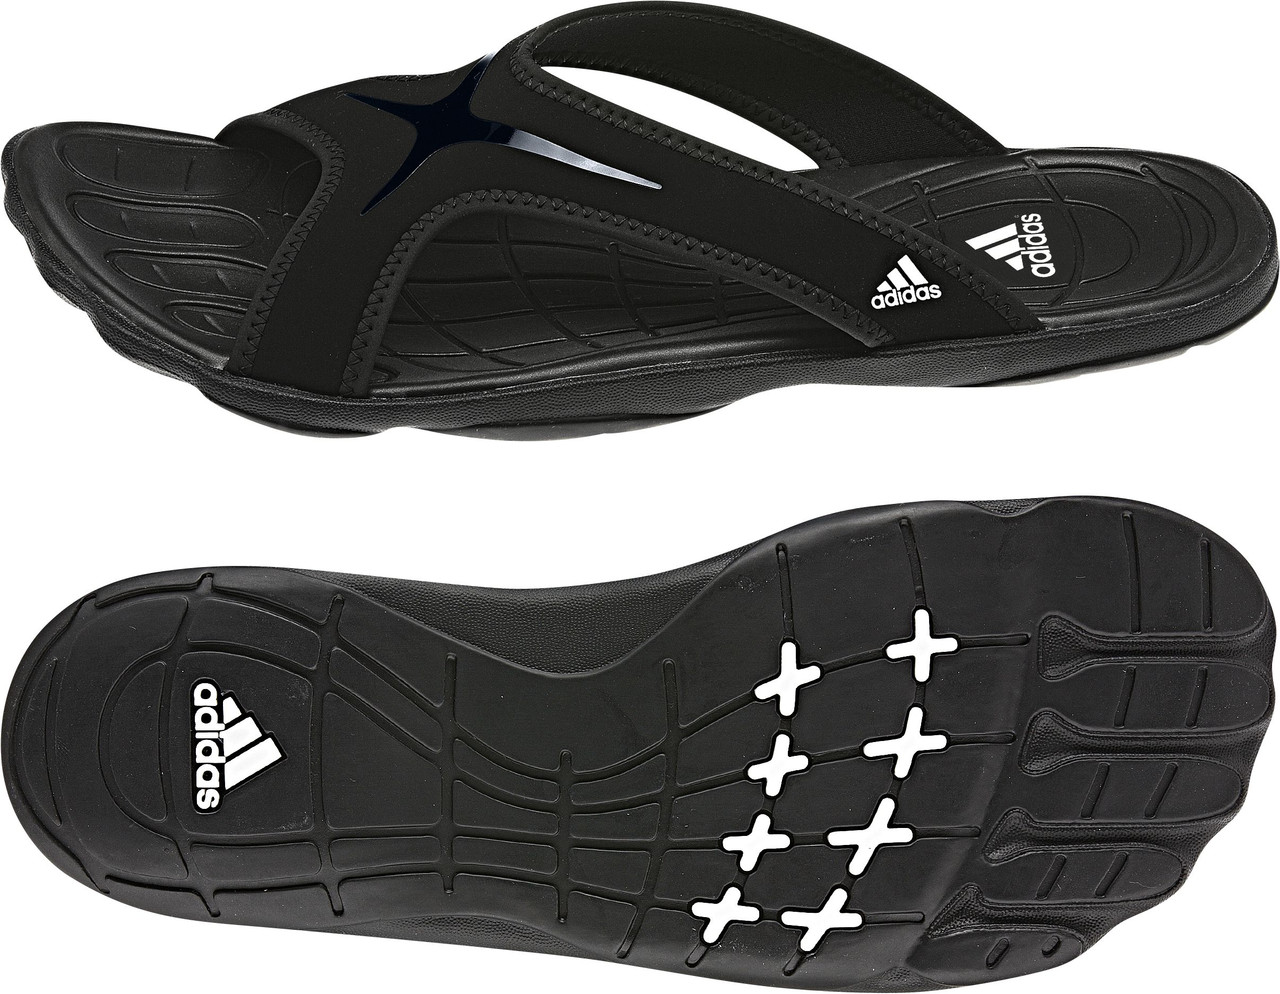 Adidas Adipure Slide Supercloud Outlet, SAVE 39% - urbancyclist.se